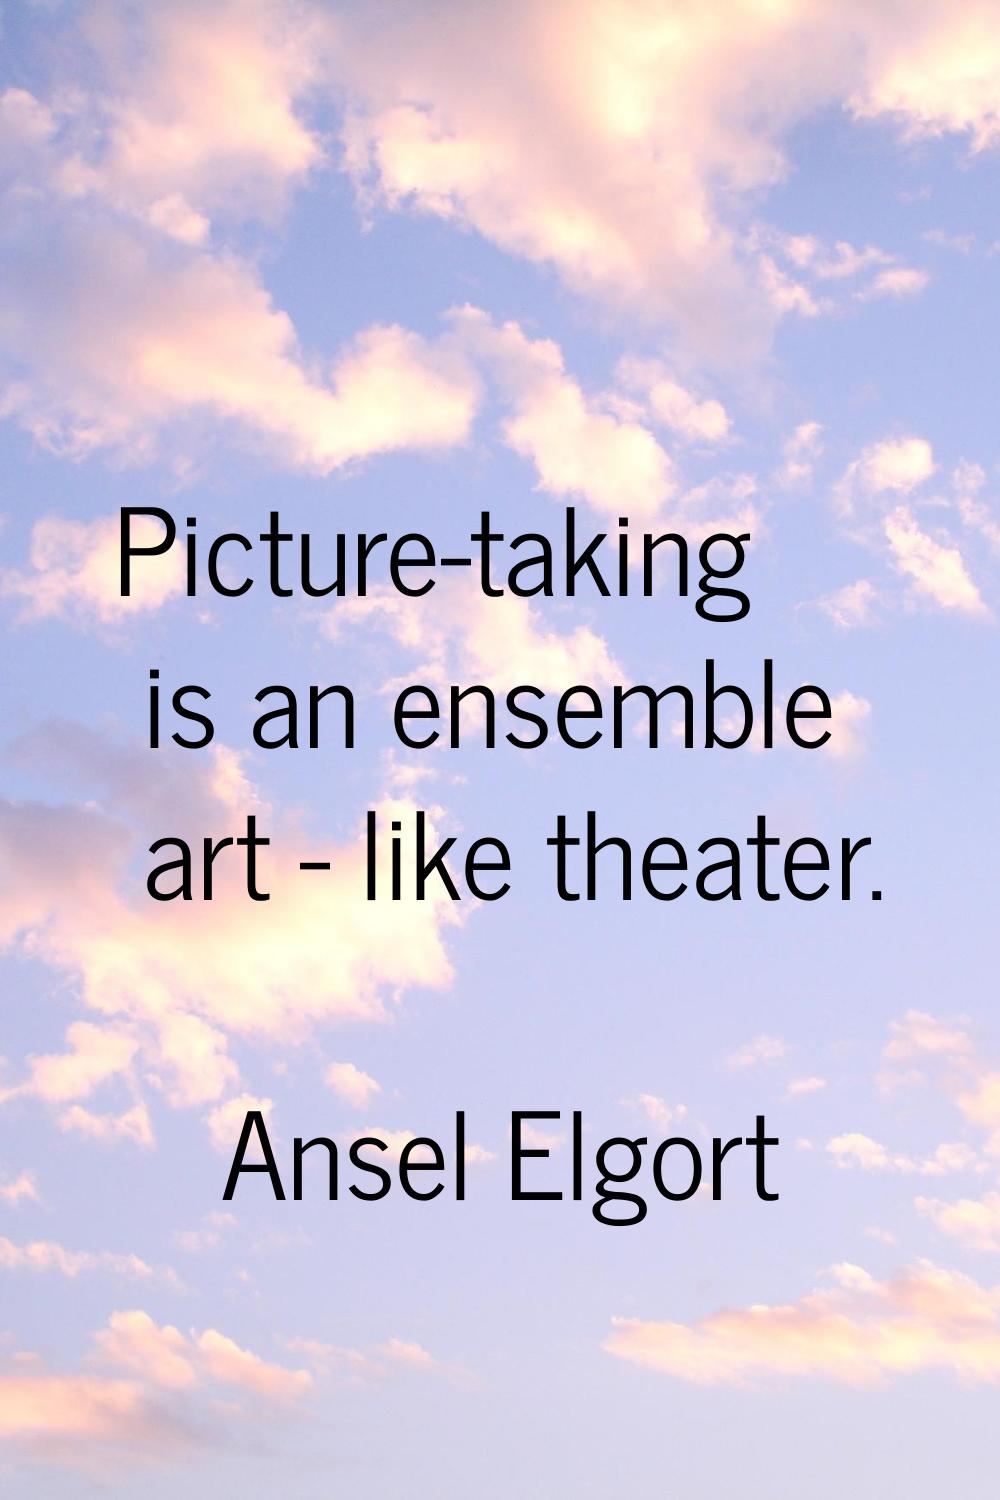 Picture-taking is an ensemble art - like theater.